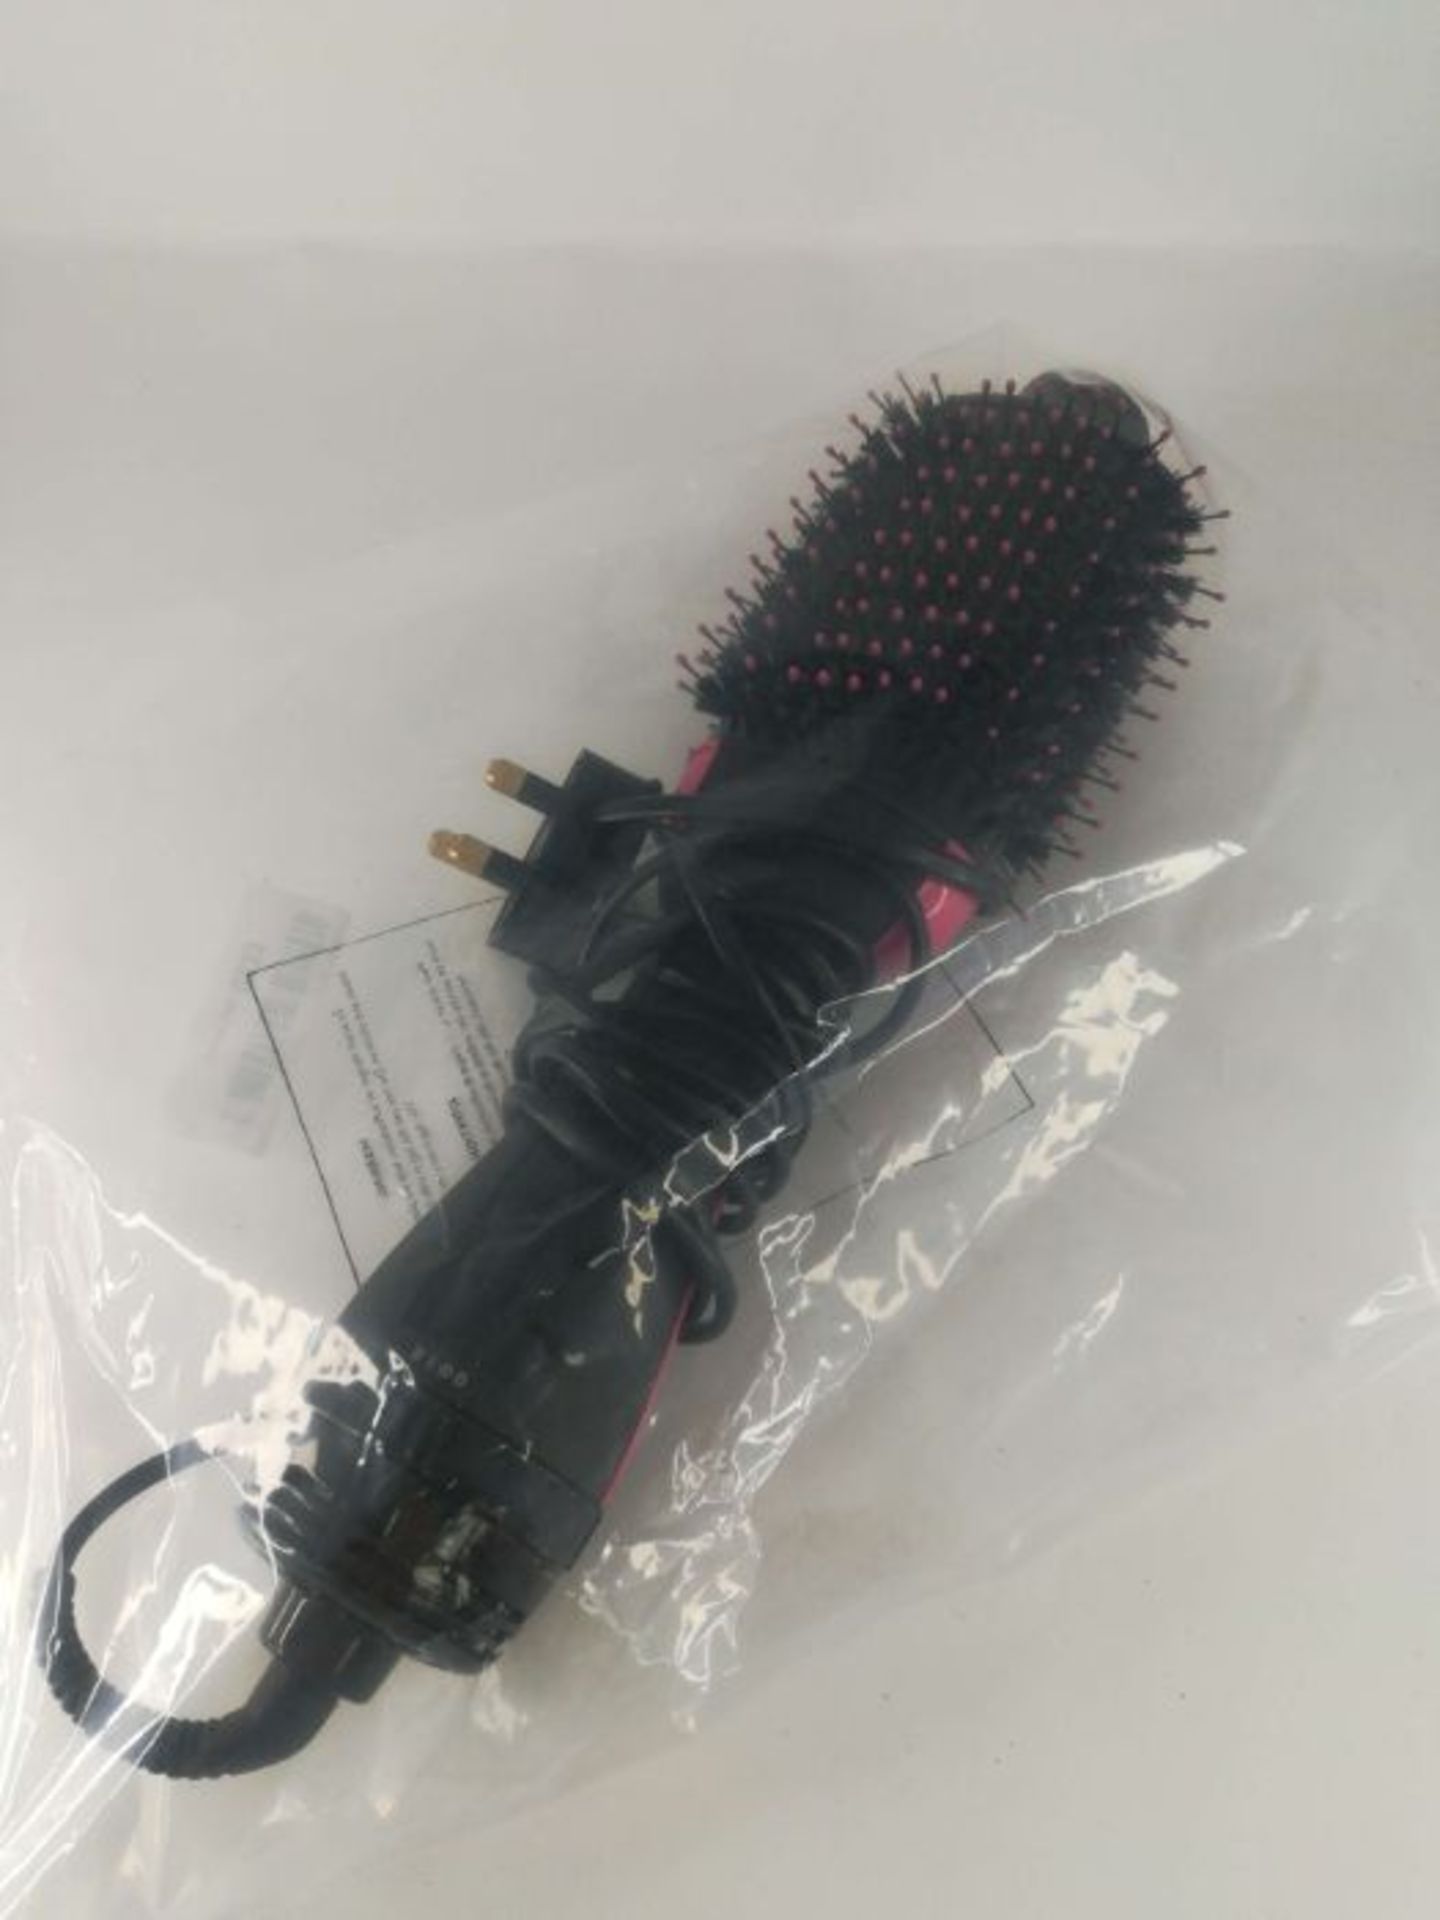 Revlon Salon One- Step Volumizer for mid to long hair (2-in-1 styling tool, dryer and - Image 2 of 2